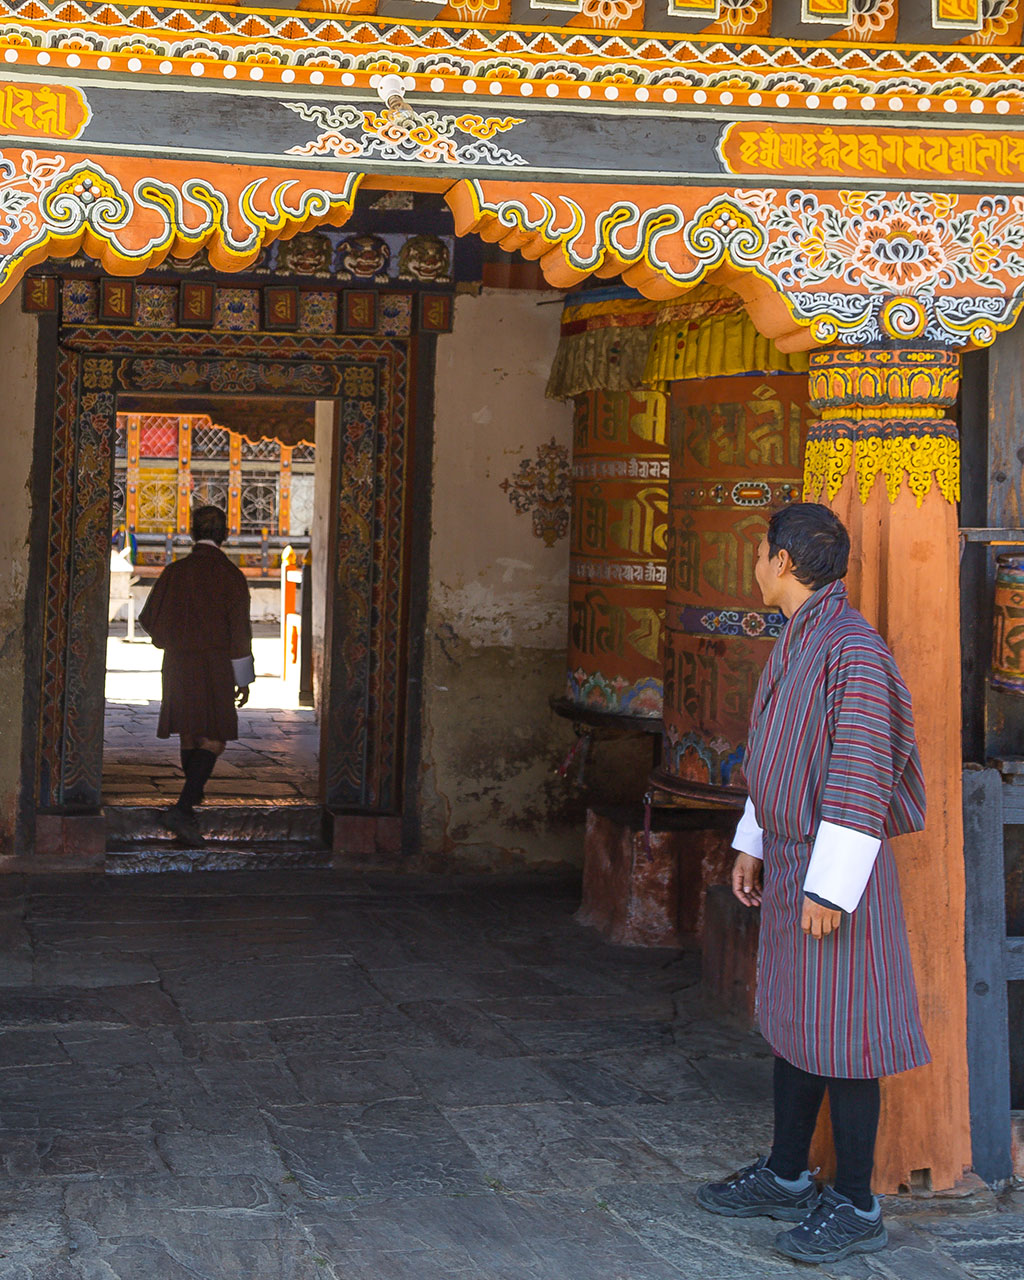 The entry way to the first courtyard of the temple. Intimate in scale and reverent in ambience.